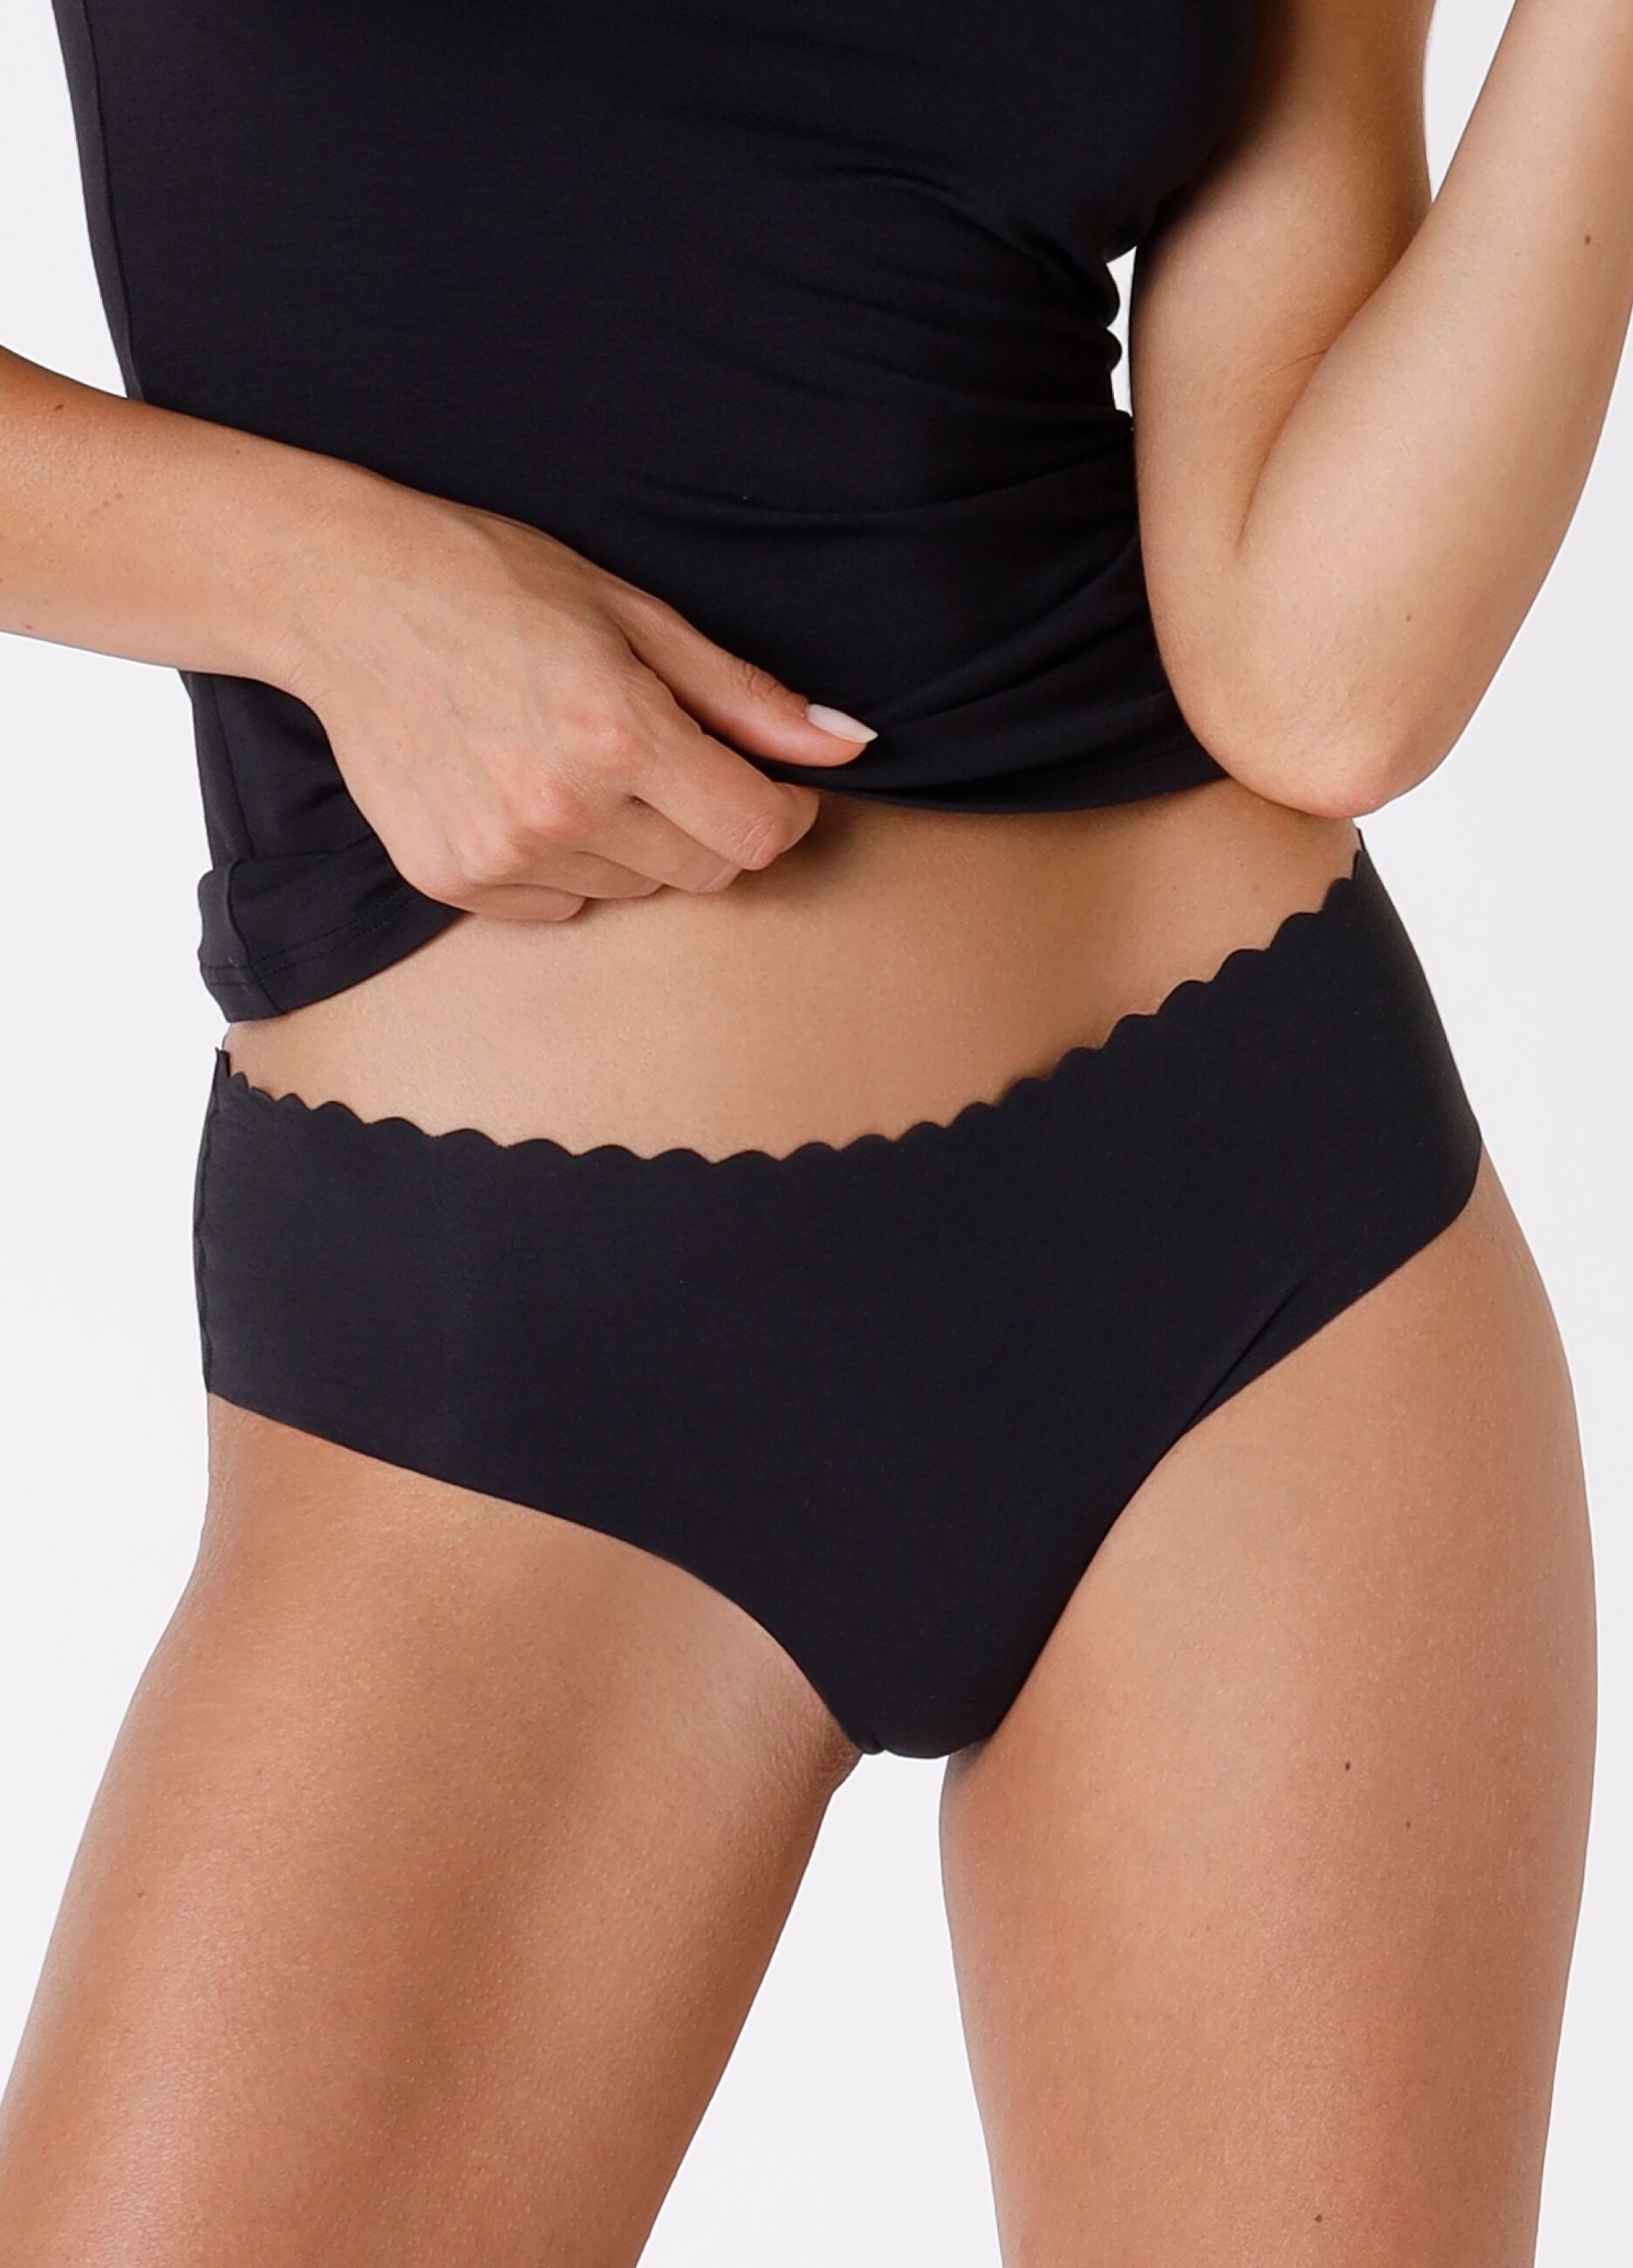 Invisible Comfort Cotton three-pack French knickers